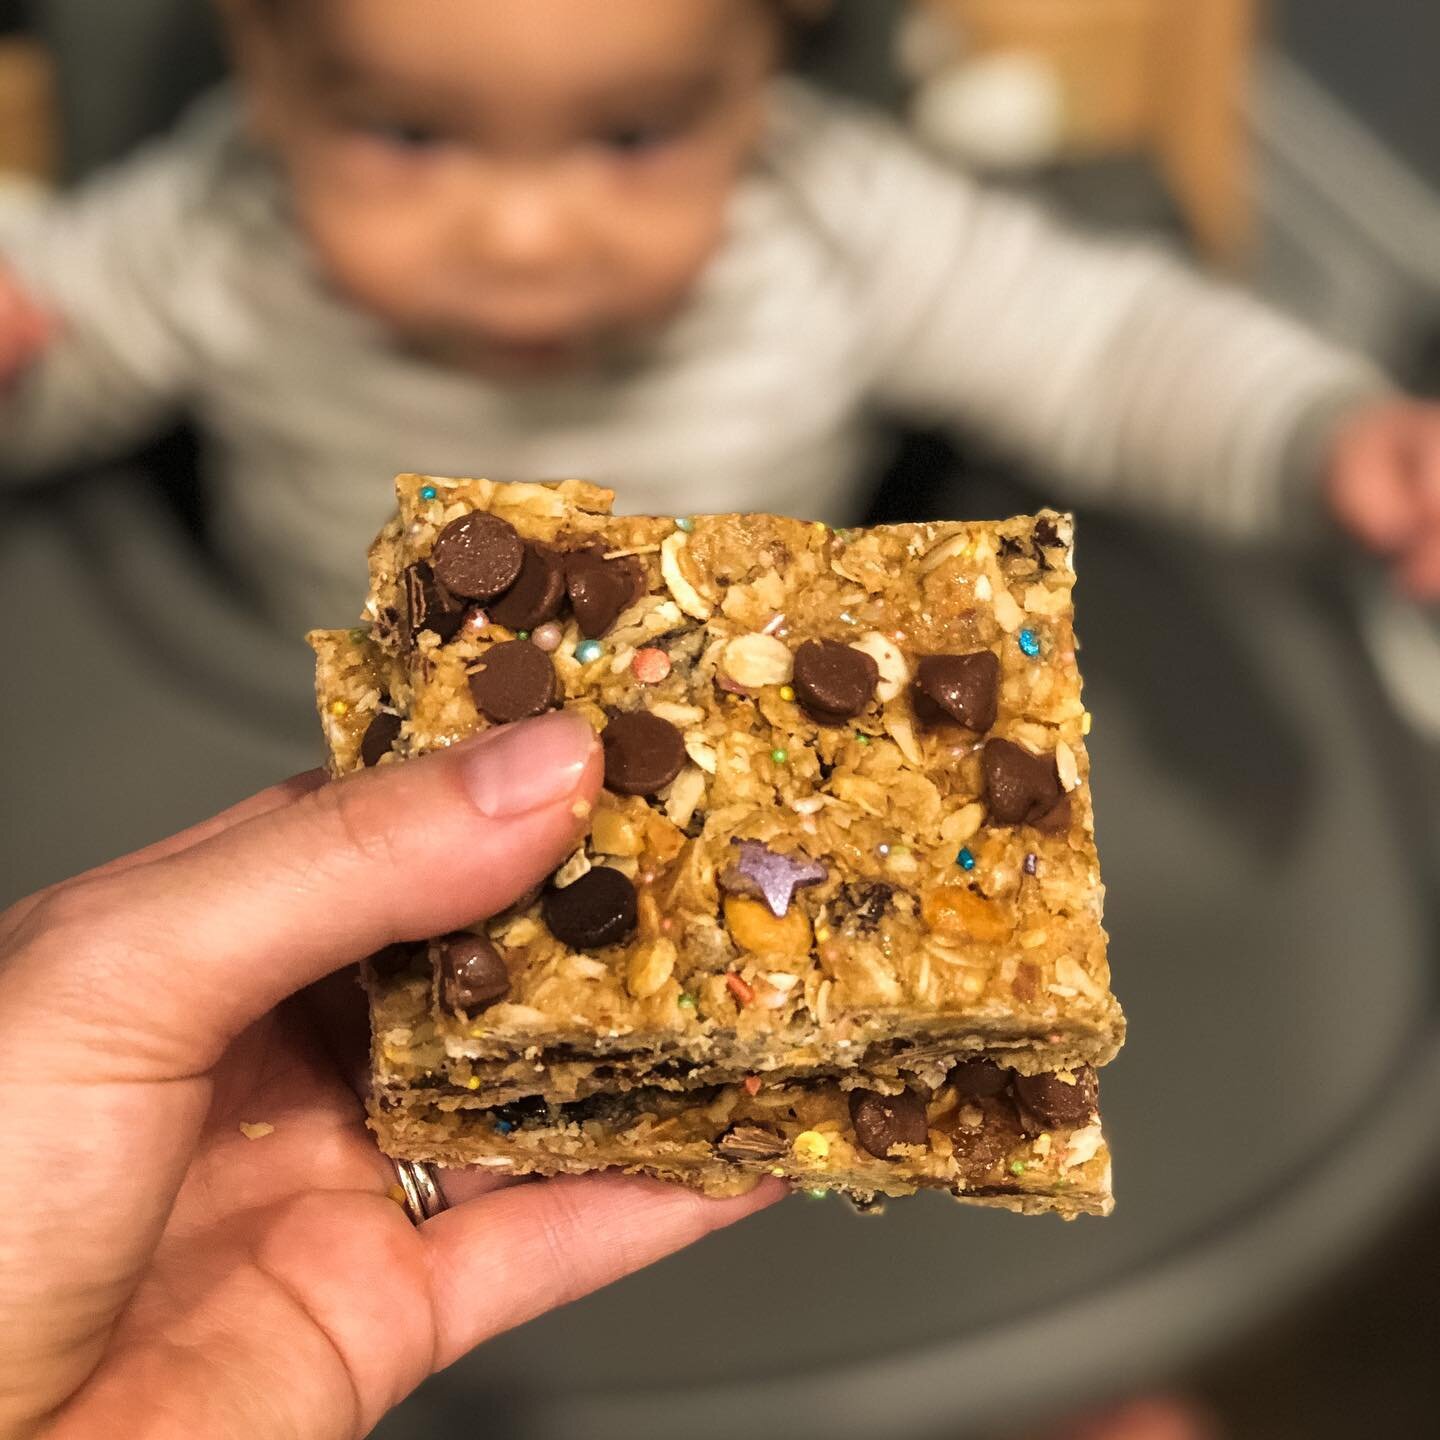 When a request was put in to add sprinkles and chocolate to these toasted oat granola bars, we delivered! An oldie but definitely a goodie of a recipe🔥😍 At katiebembaking.com💁🏼&zwj;♀️
&bull;
&bull;
&bull;
&bull;
#baker #blogger #firsttimemom #mom